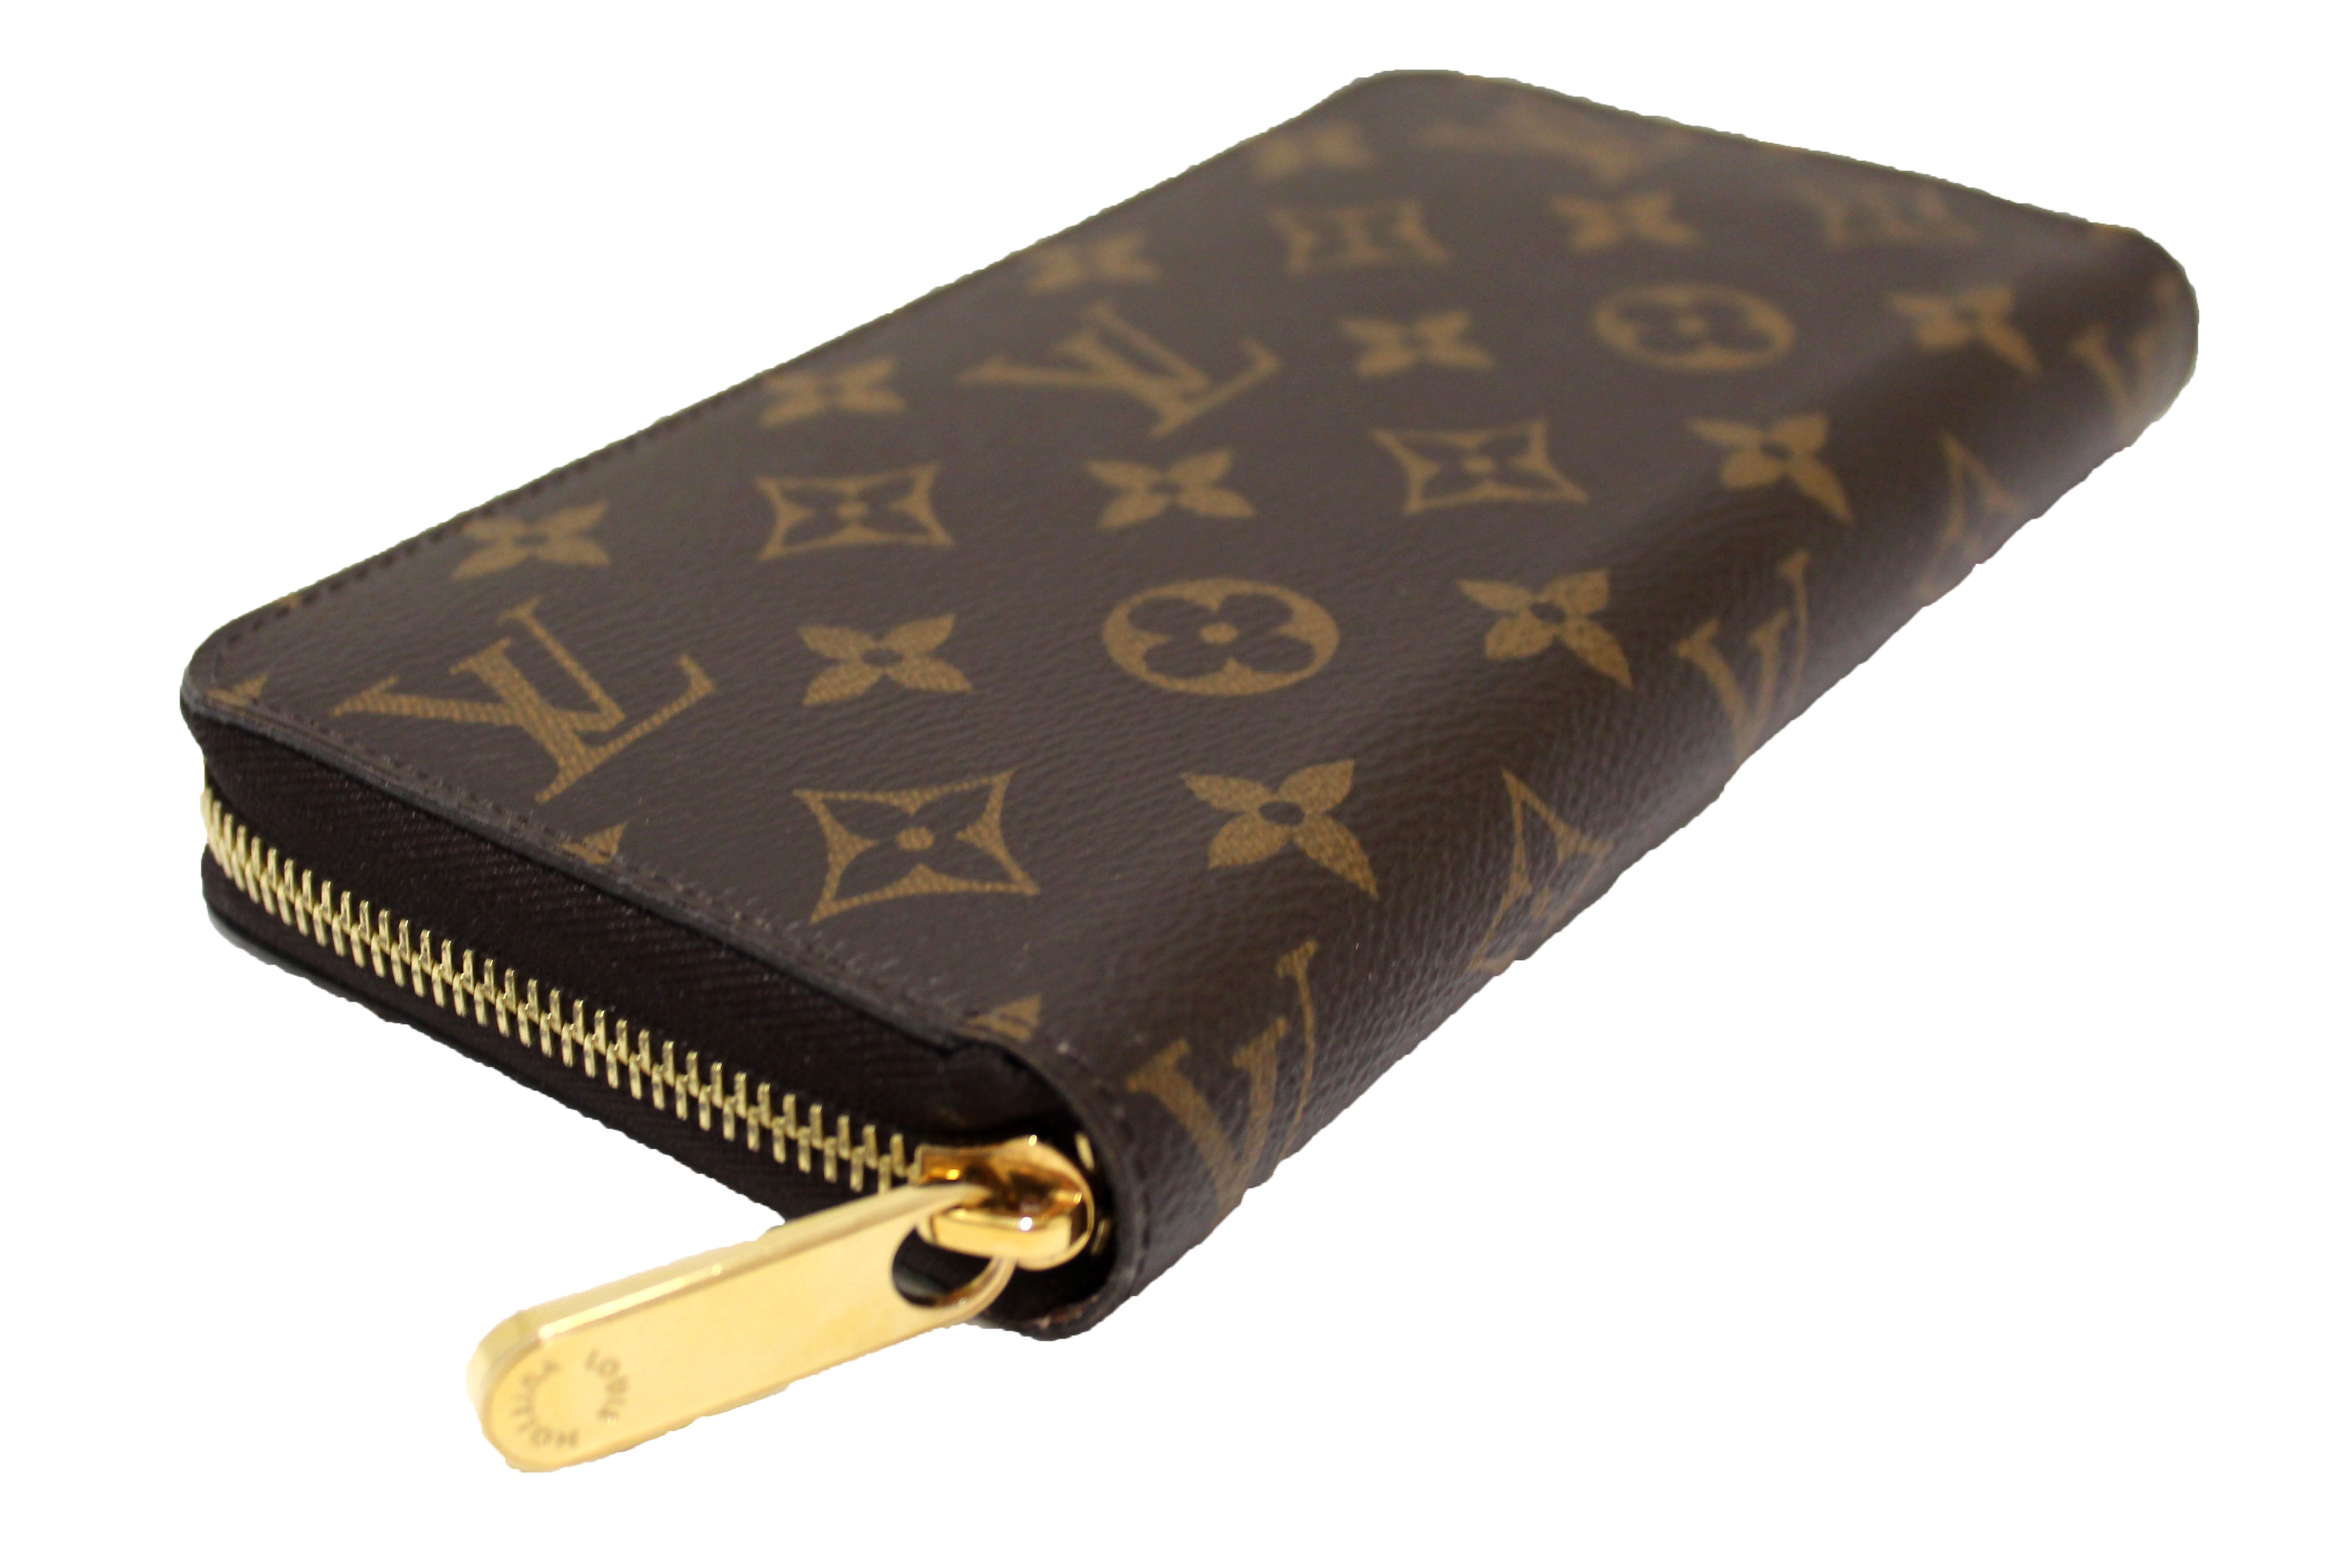 Authentic Louis Vuitton Classic Monogram Canvas Zippy with Rose Pink Interior Wallet